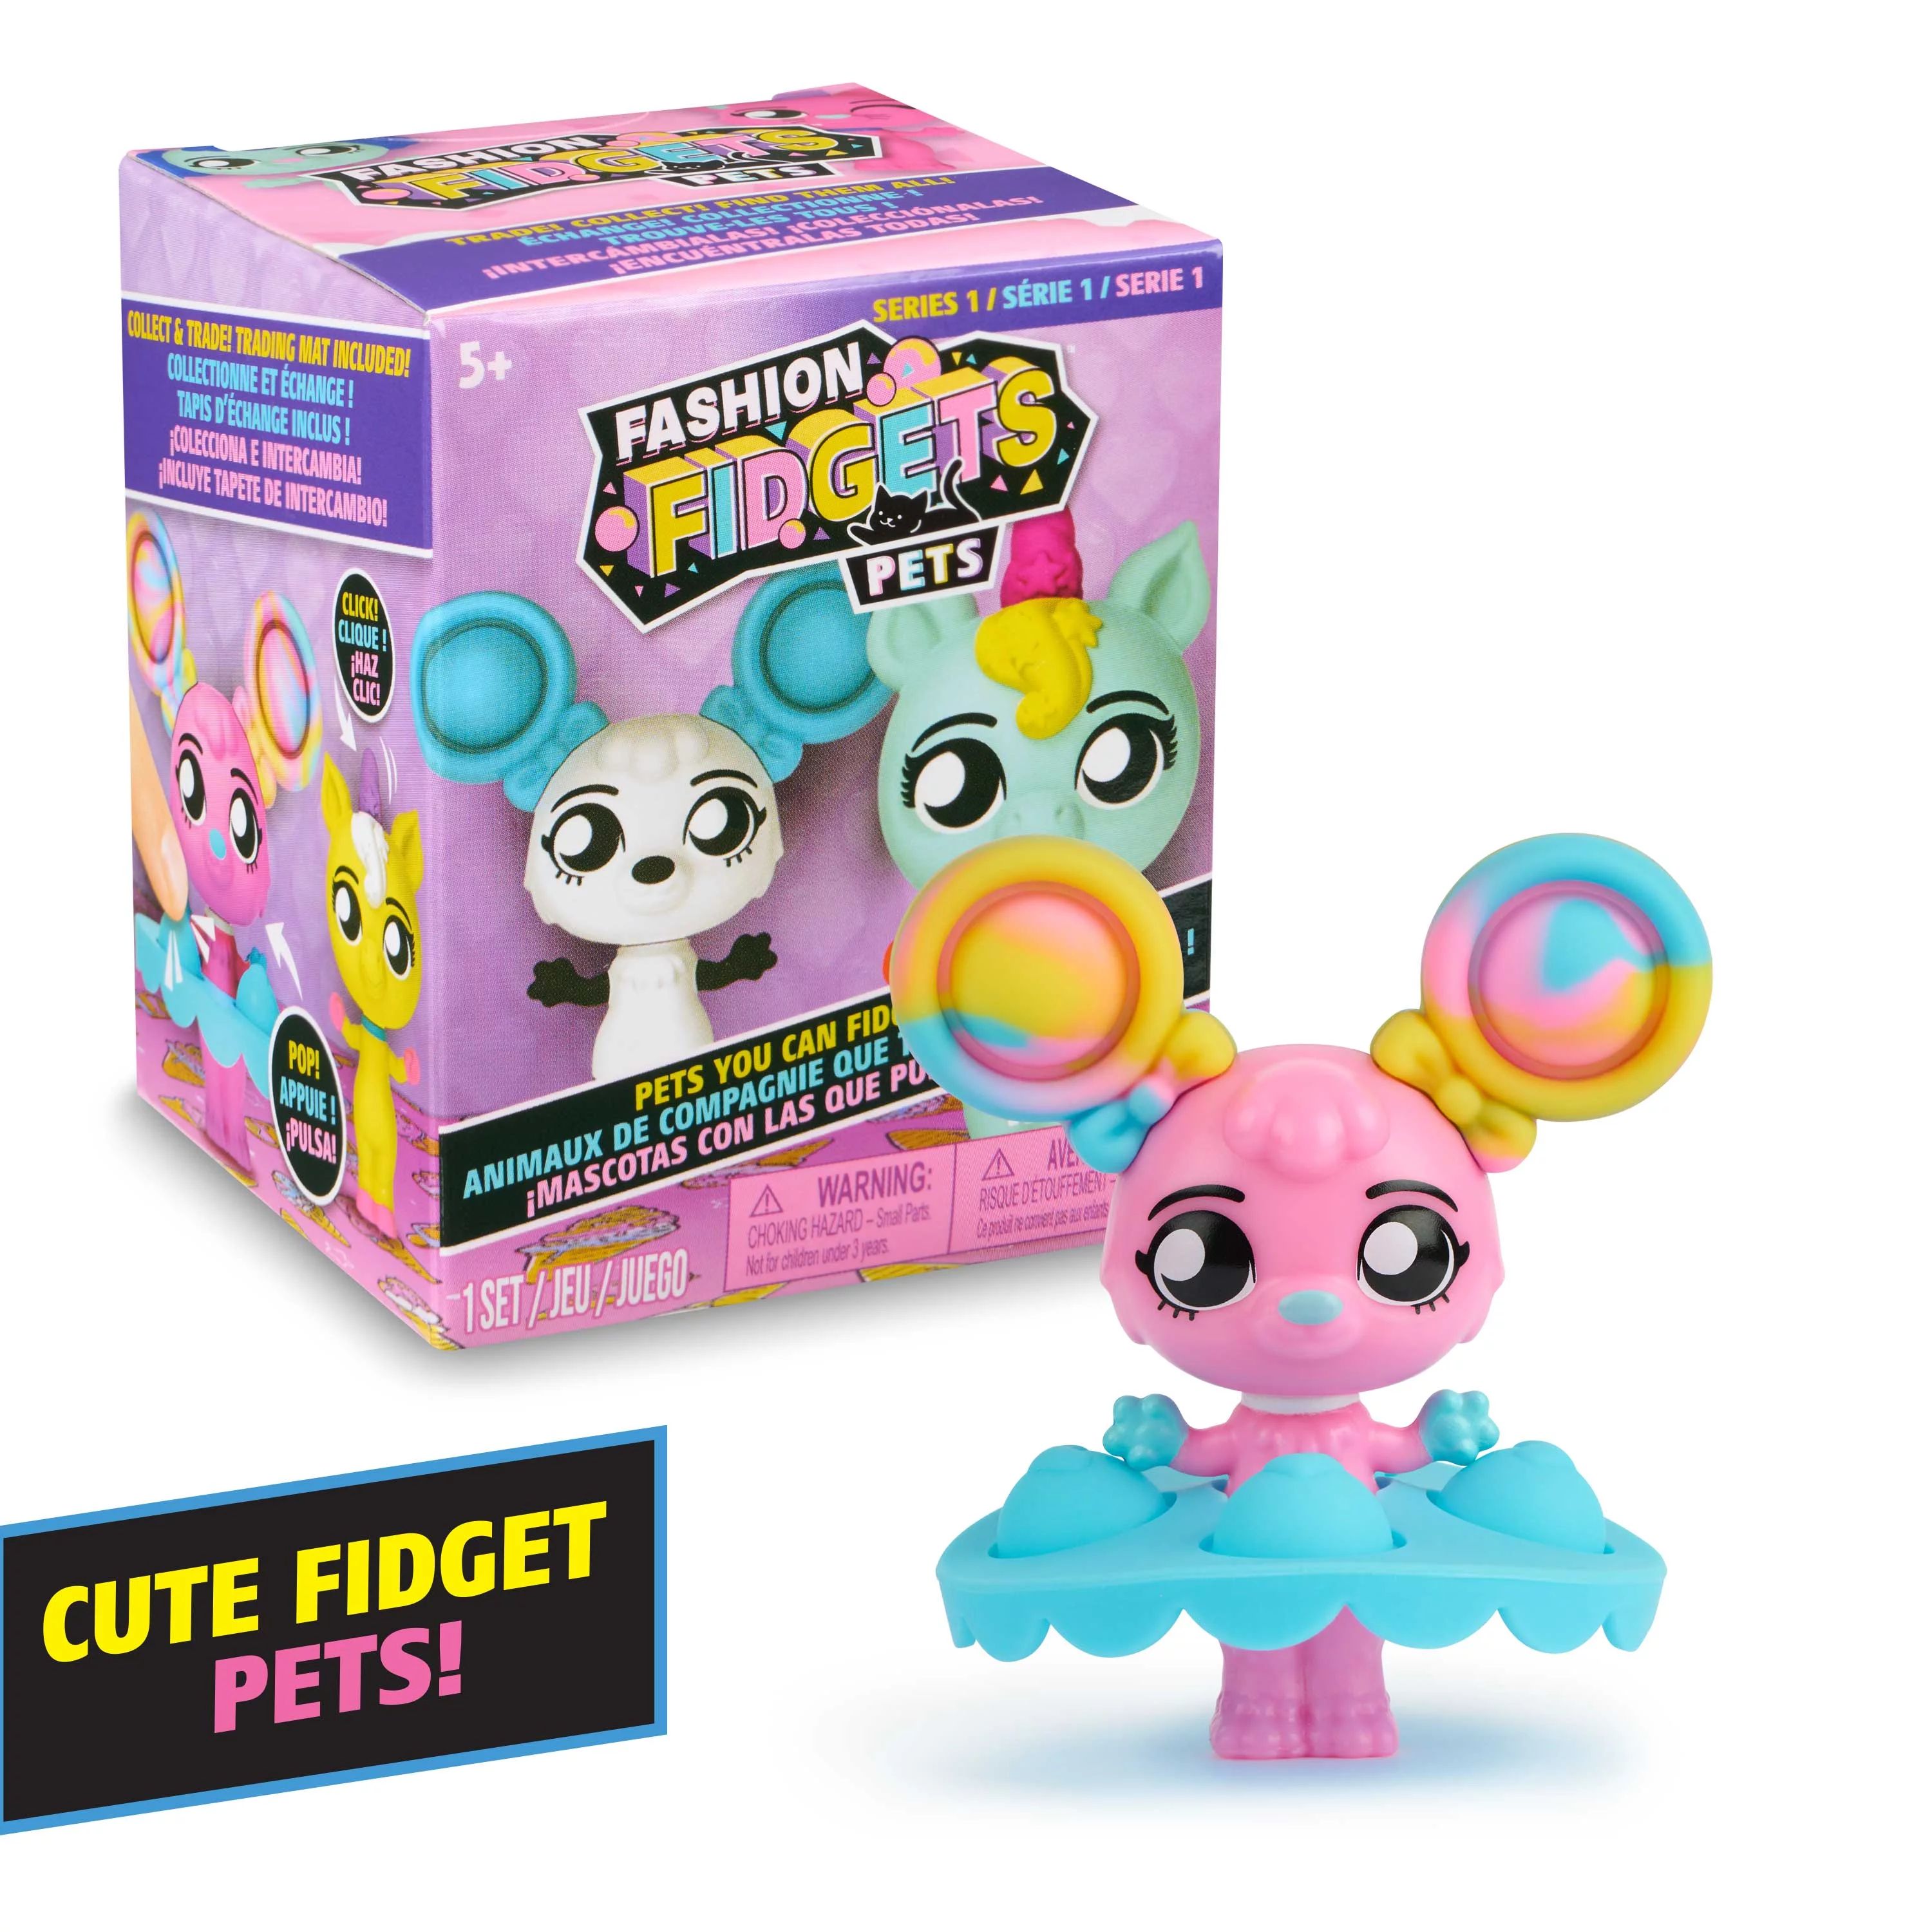 Fashion Fidgets Pets Collectible Fidget Pet Doll by WowWee (1 Mystery Doll Included, Series 1), A... | Walmart (US)